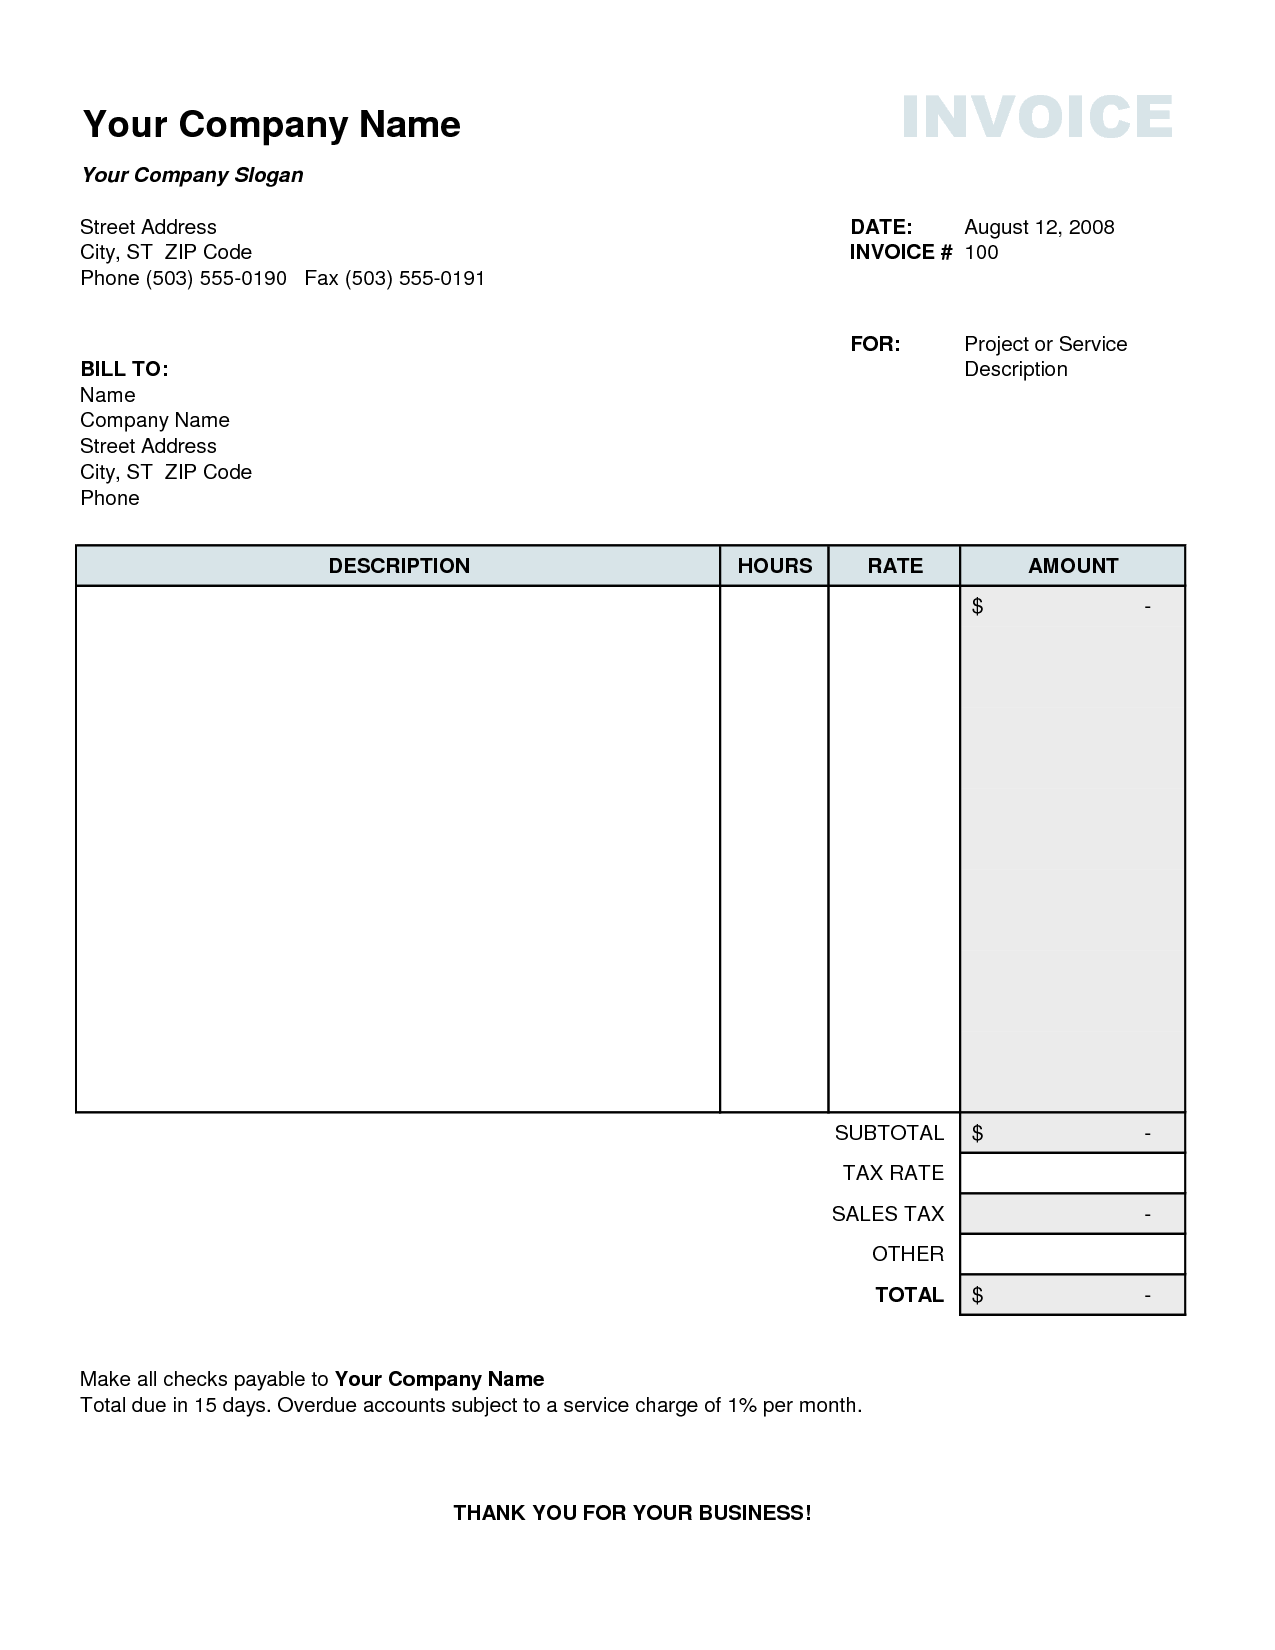 Free Tax Invoice Template Excel invoice example